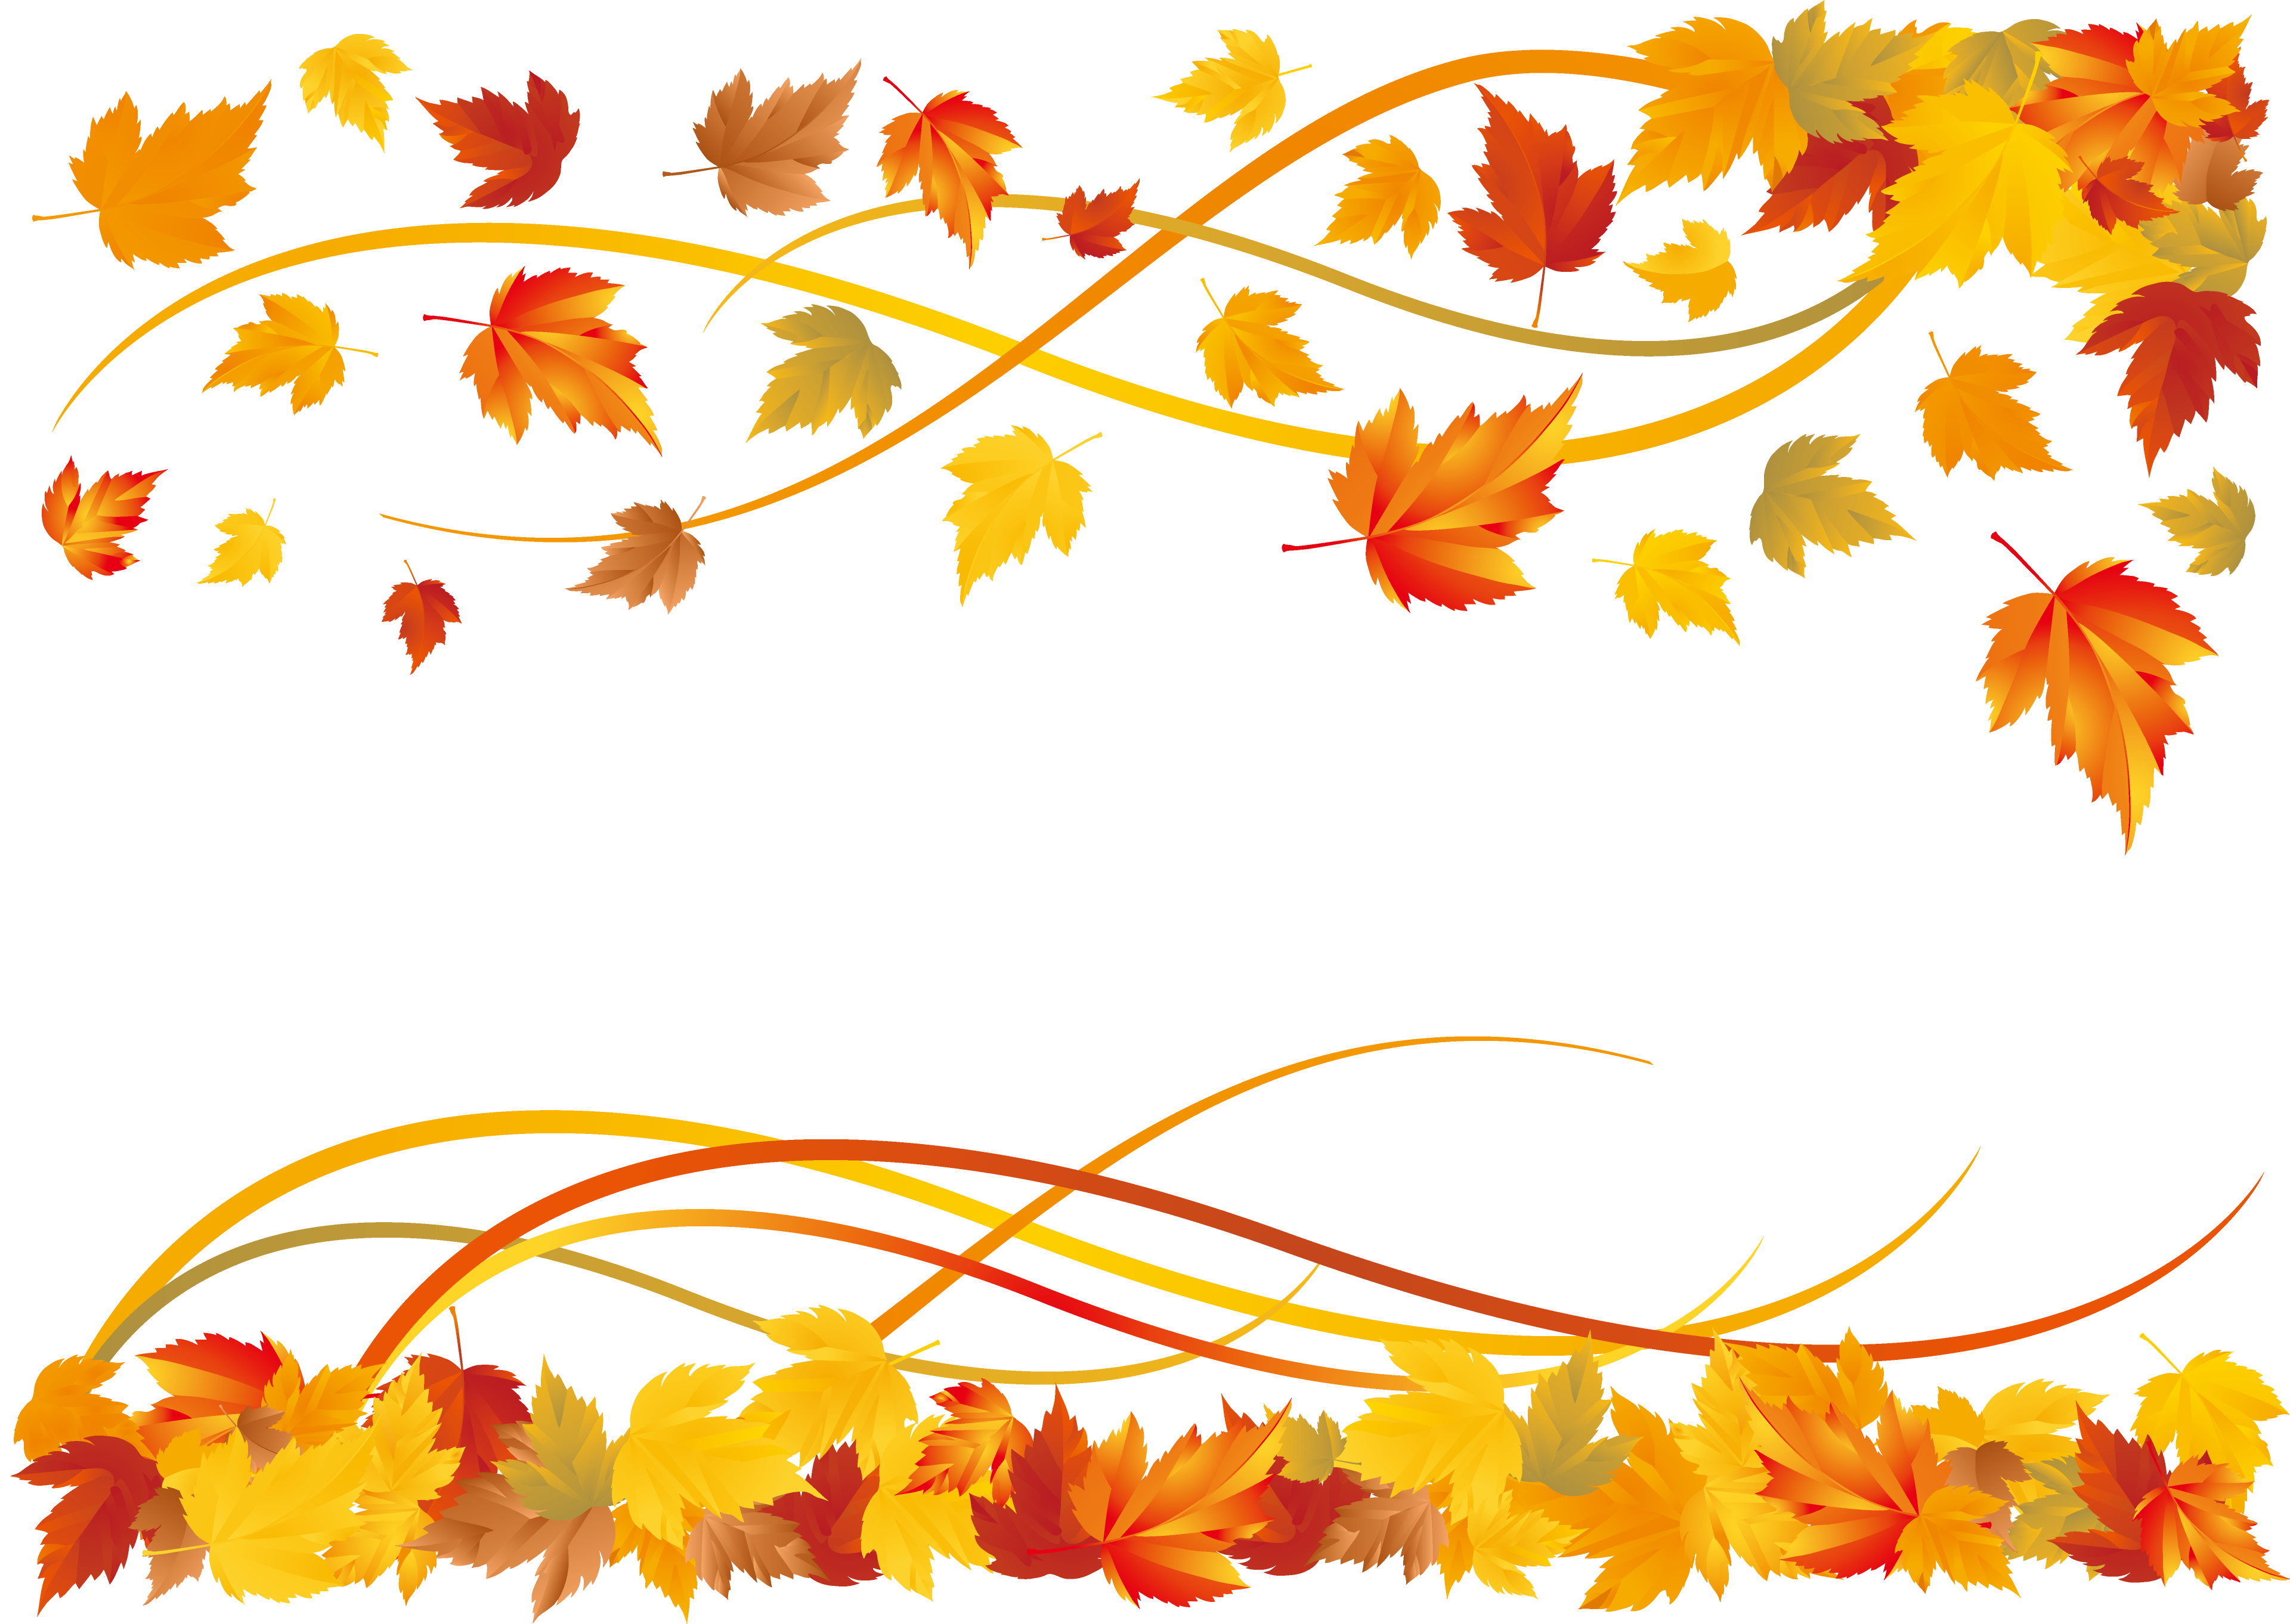 image-result-for-fall-borders-fall-picture-frame-fall-borders